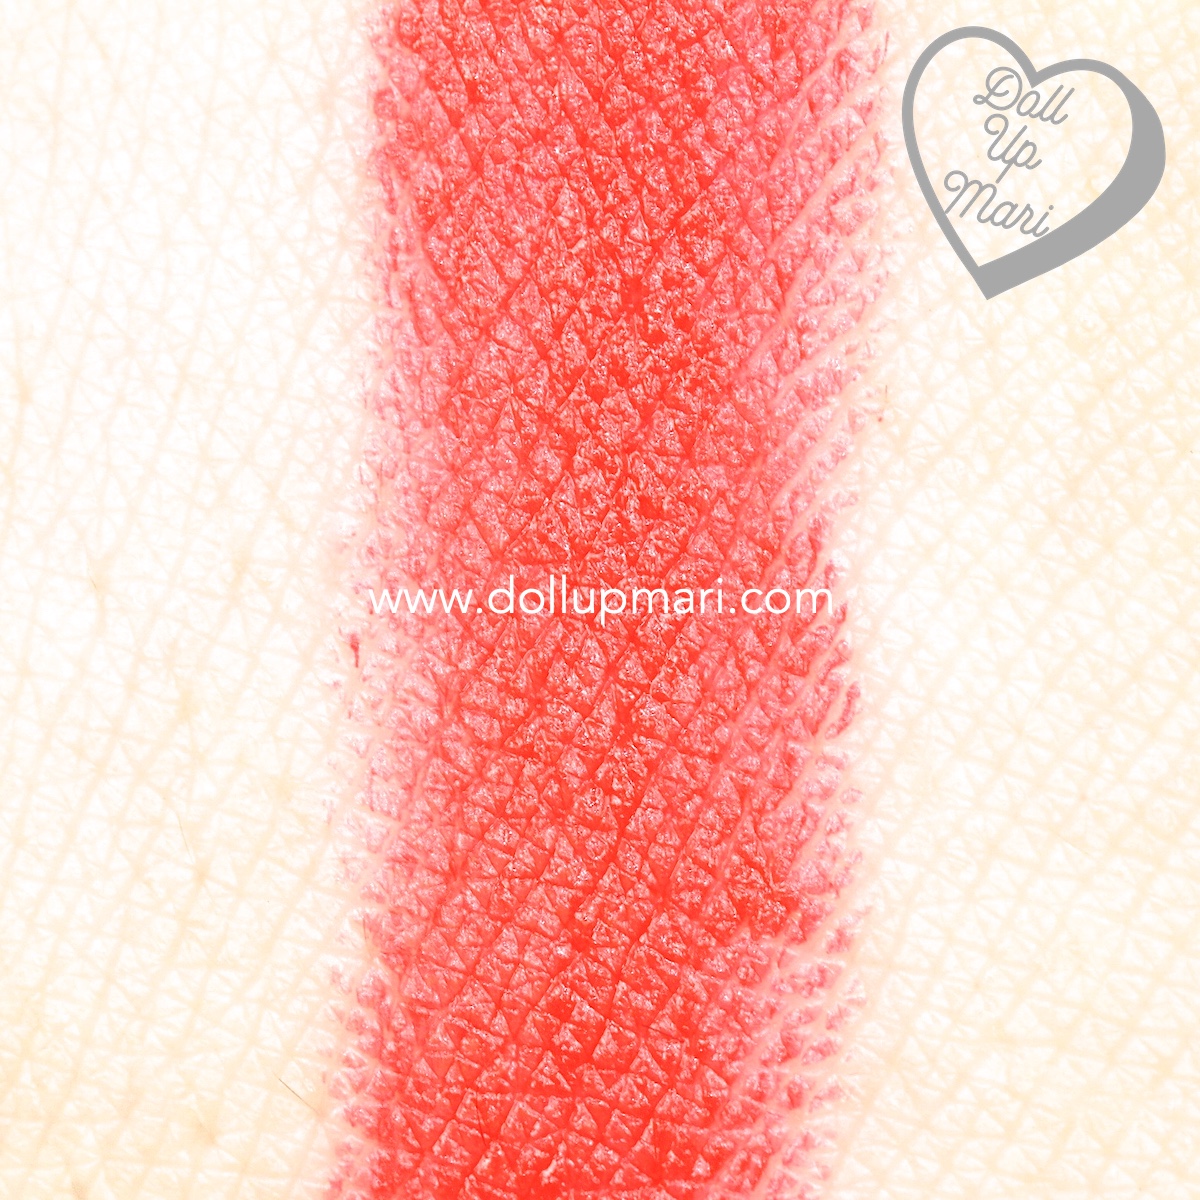 swatch of Coral Fever shade of AVON Perfectly Matte Lipstick